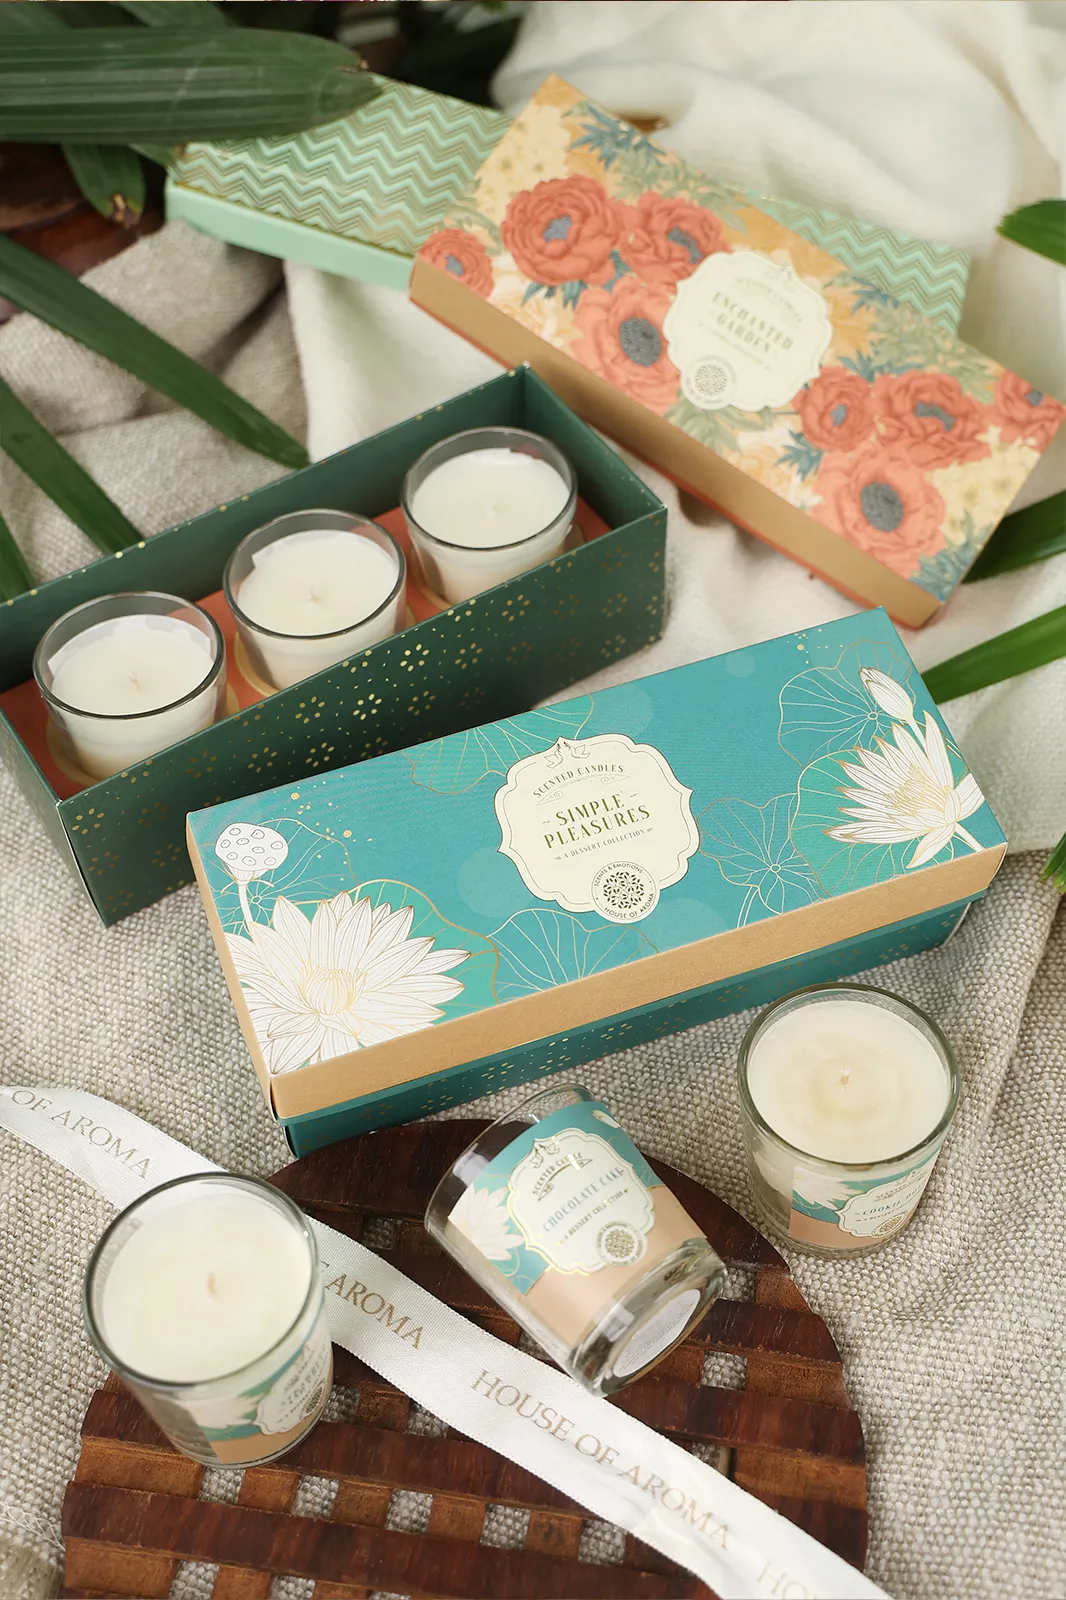 scented candles fragrances combo pack, scented candles fragrances, scented candles gift set, online scented candles, best fragrances for candles, combo pack, scented candles for Christmas, luxury scented candles, best scented candles online, combo offer, soy candle fragrances, house of aroma